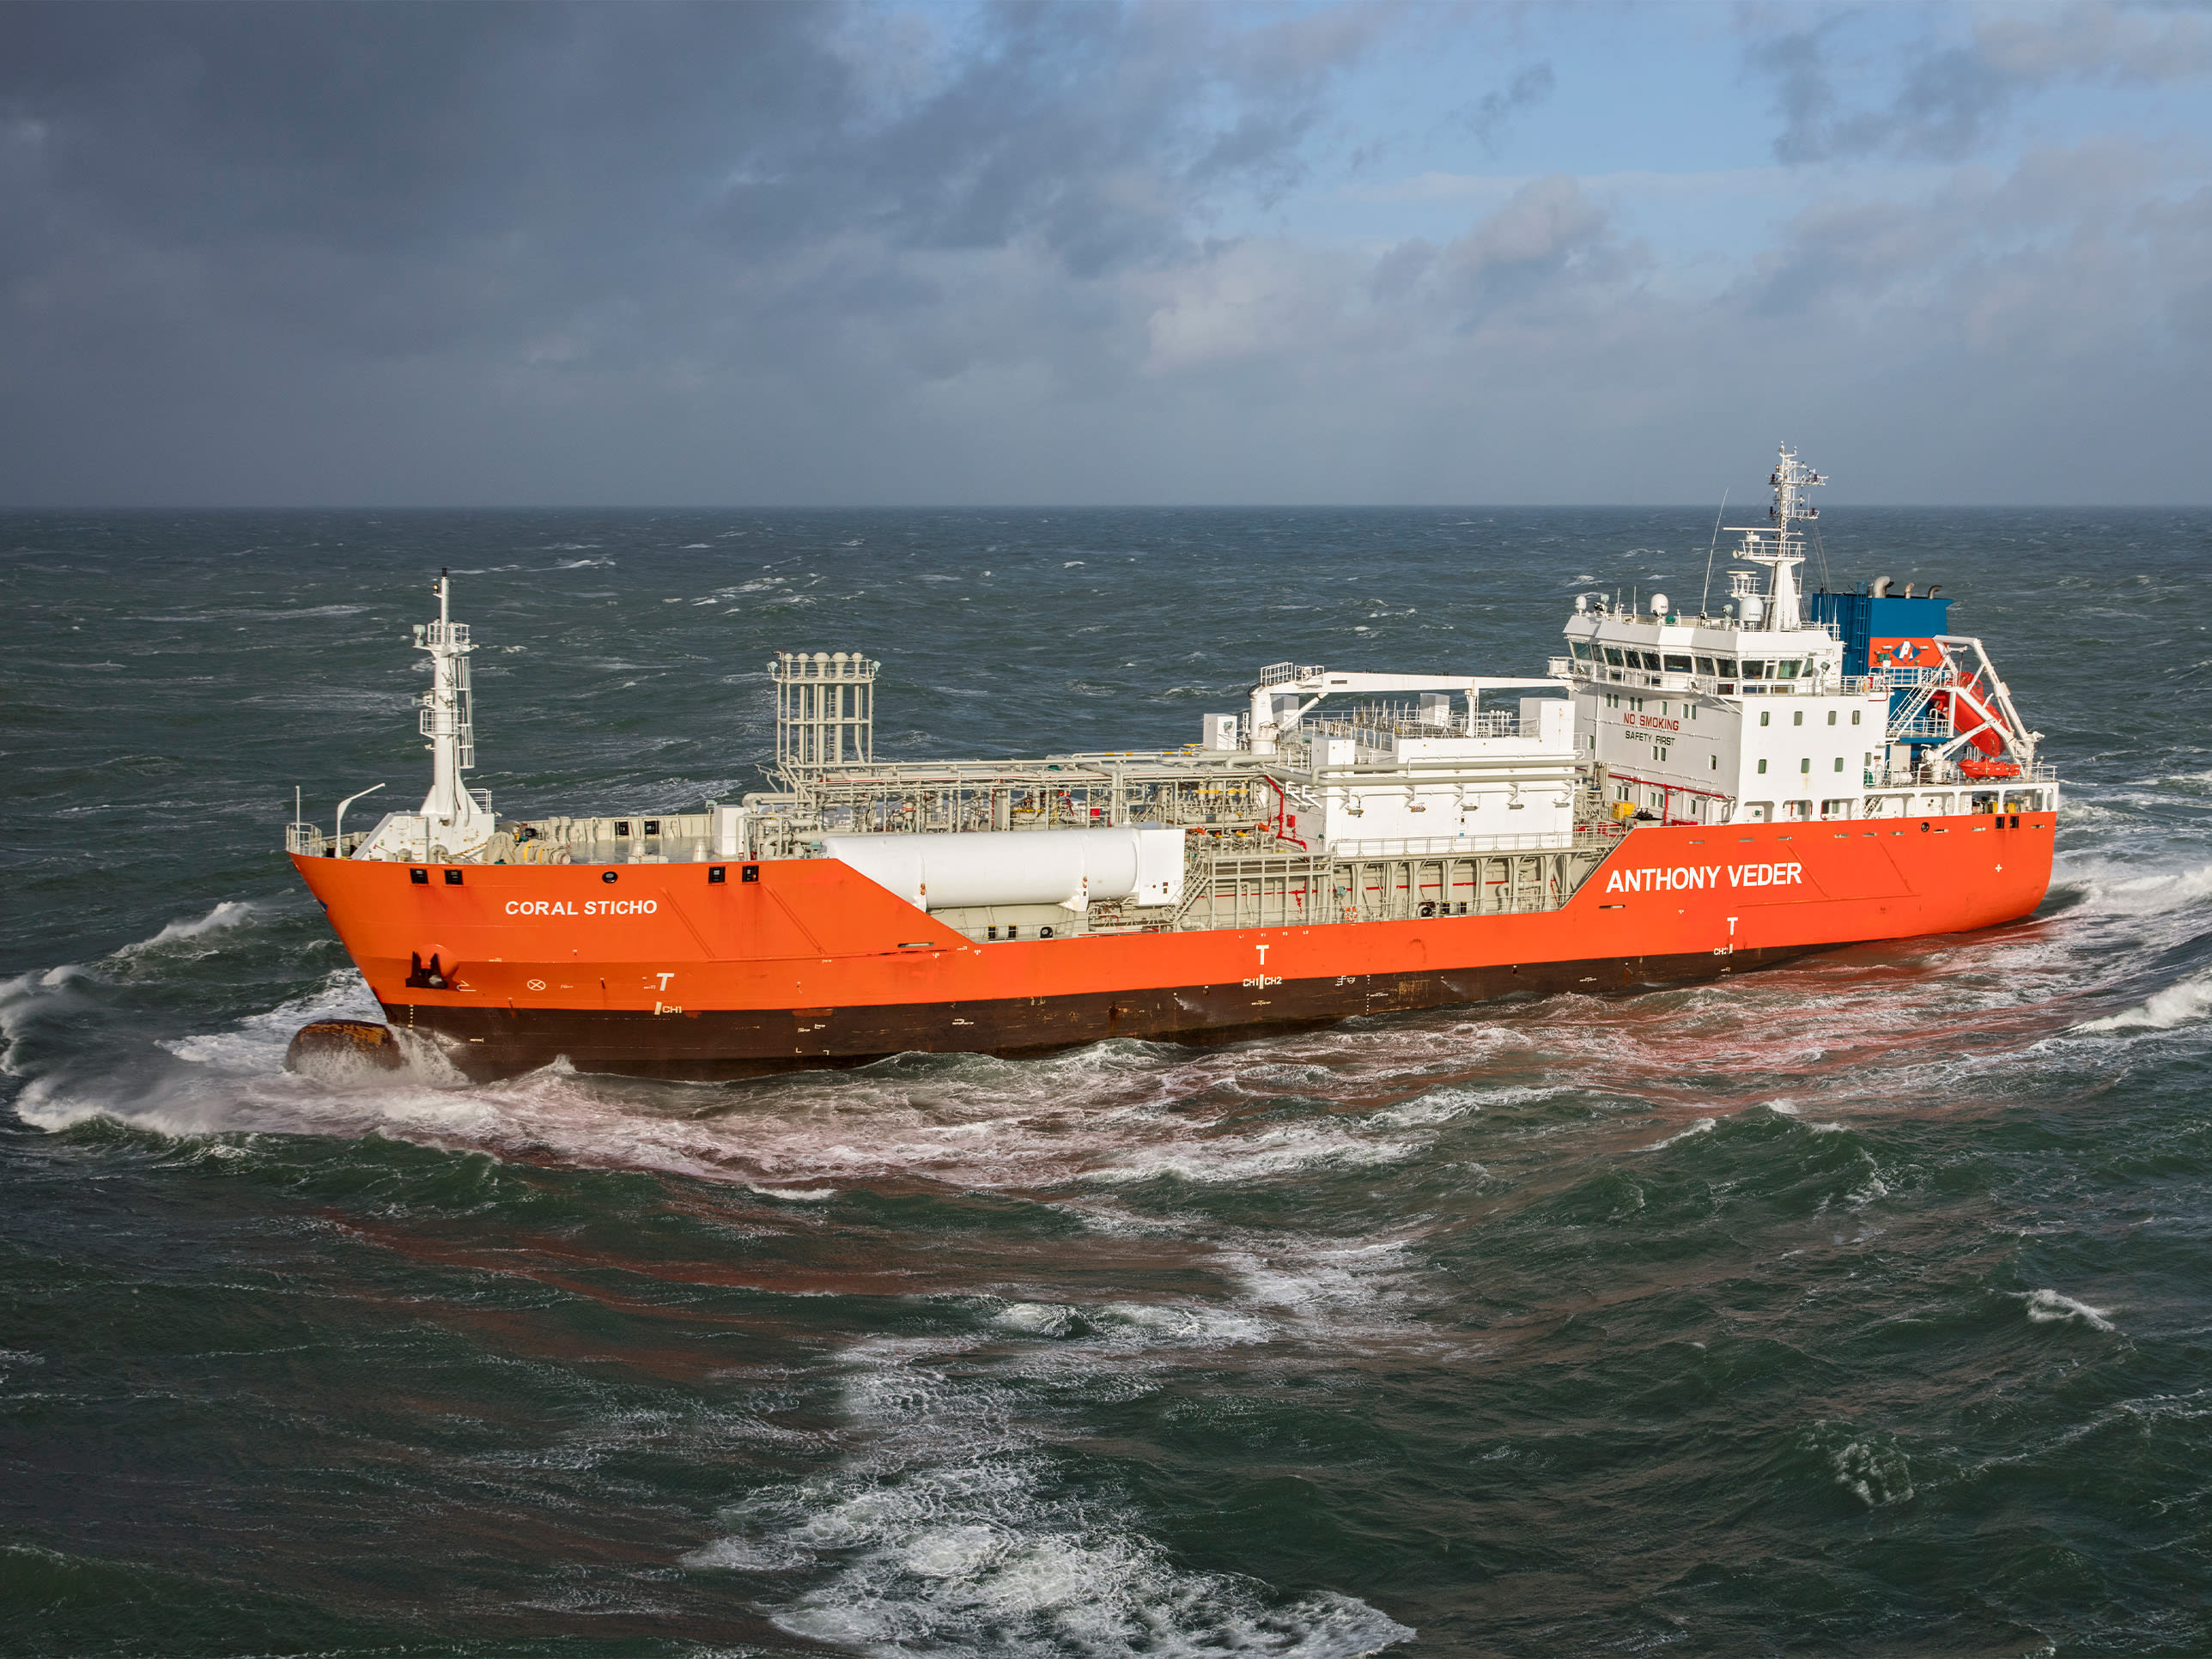 Fuel consumption monitoring and reporting on LPG tankers